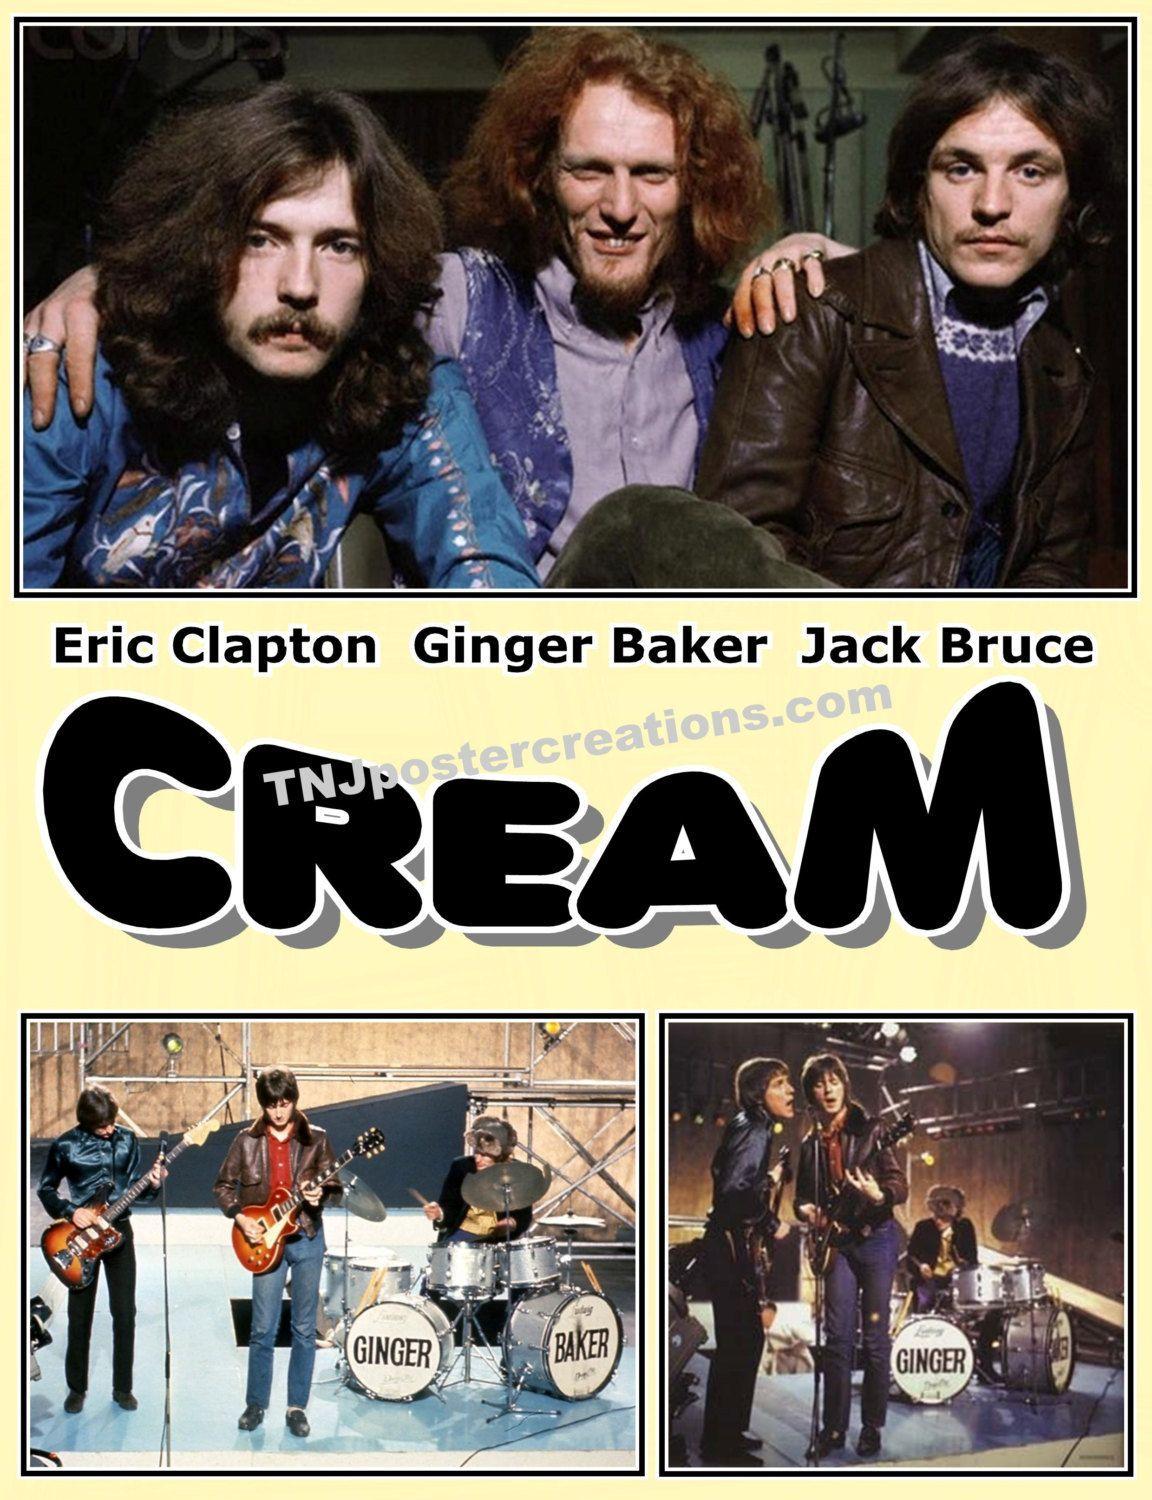 Cream Rock Band Logo - Rock Band “Cream” Poster in 2019 | Days of REAL Music Remembered ...